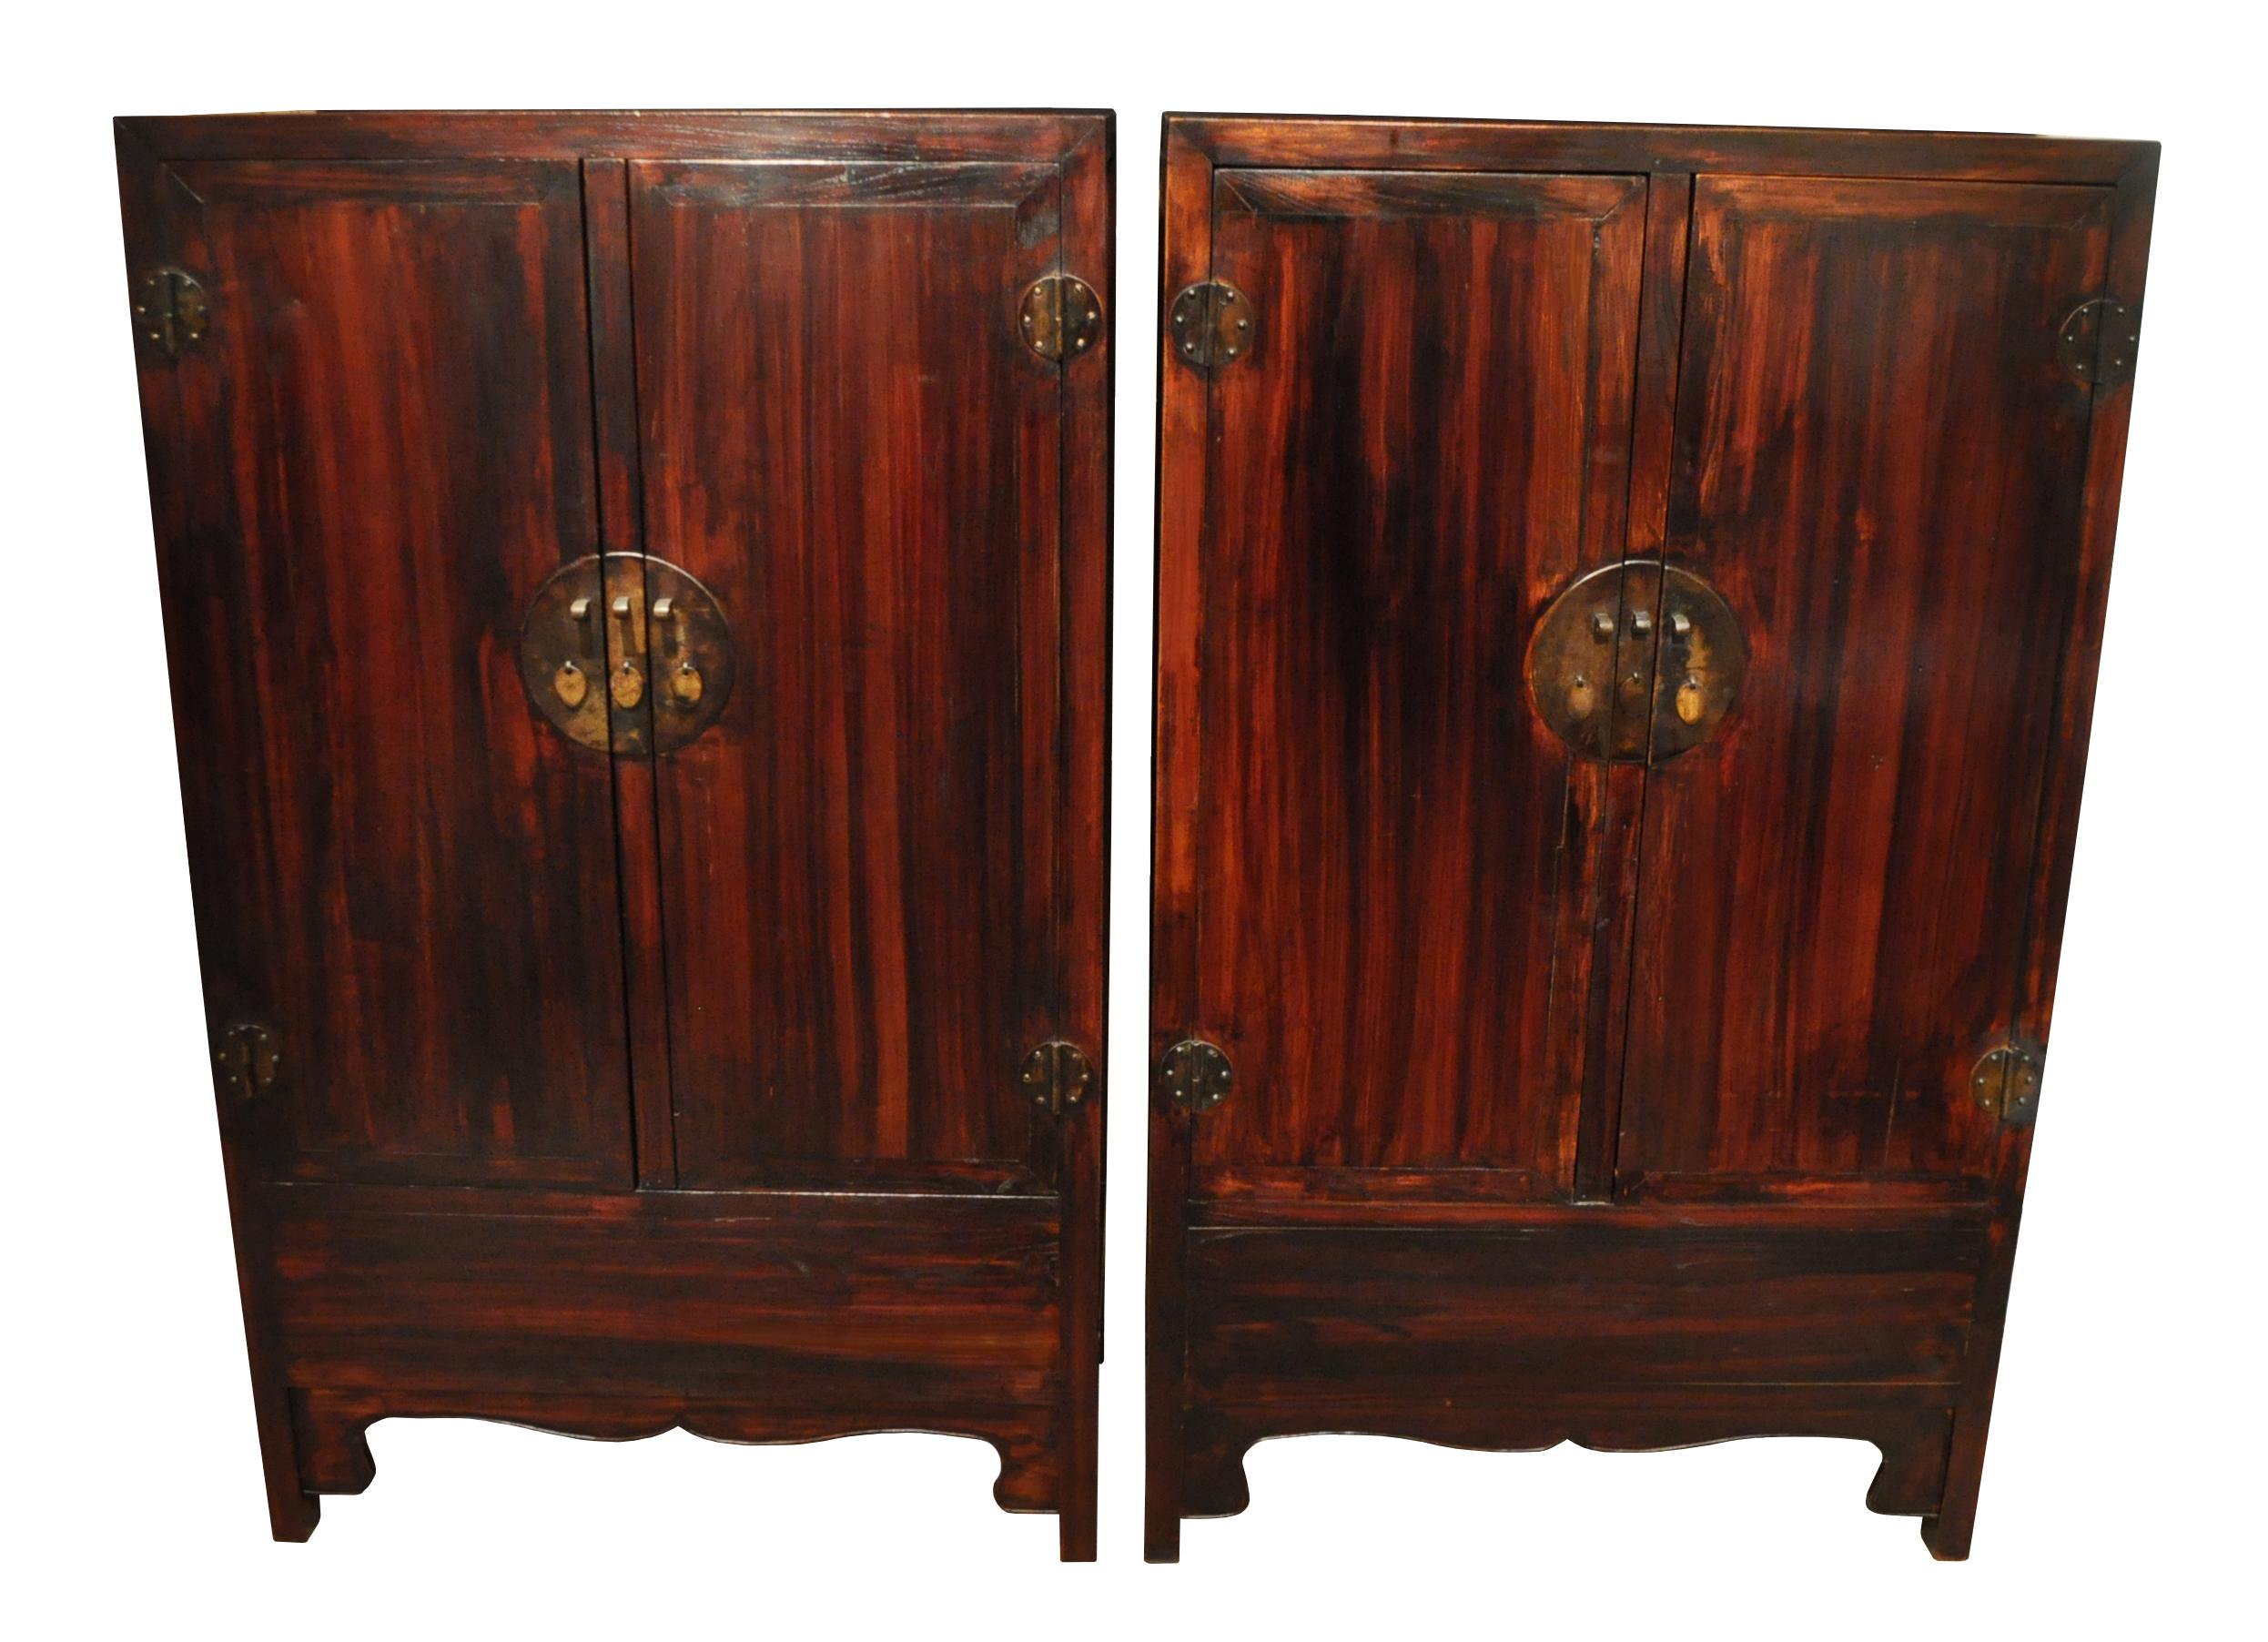 A handsome pair of Ming style early 20th century wedding cabinets 
of traditional mitered mortise and tenon construction,
the fronts of the cabinets have matching pearled edge aprons and brass lotus petal pulls on attractive circular brass face